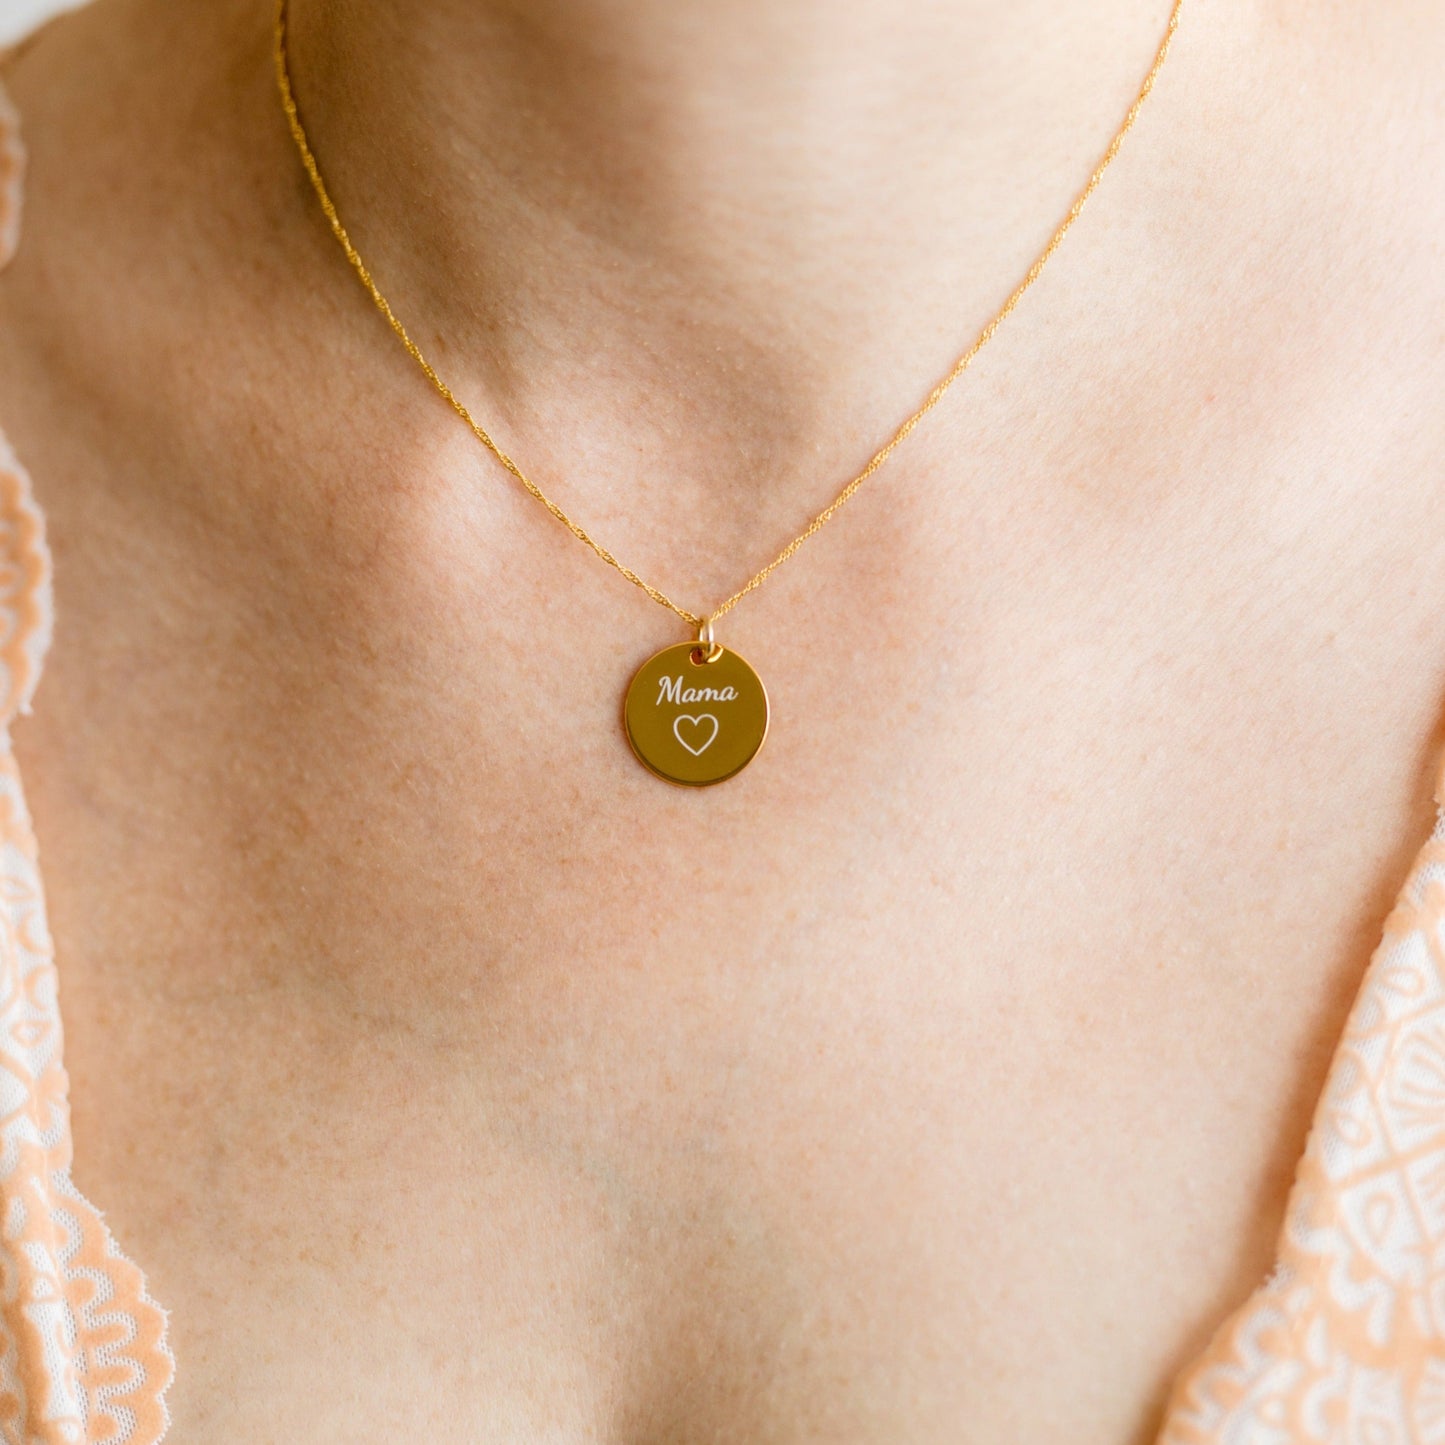 Personalized Pendant Necklace in Gold-Plated Sterling Silver